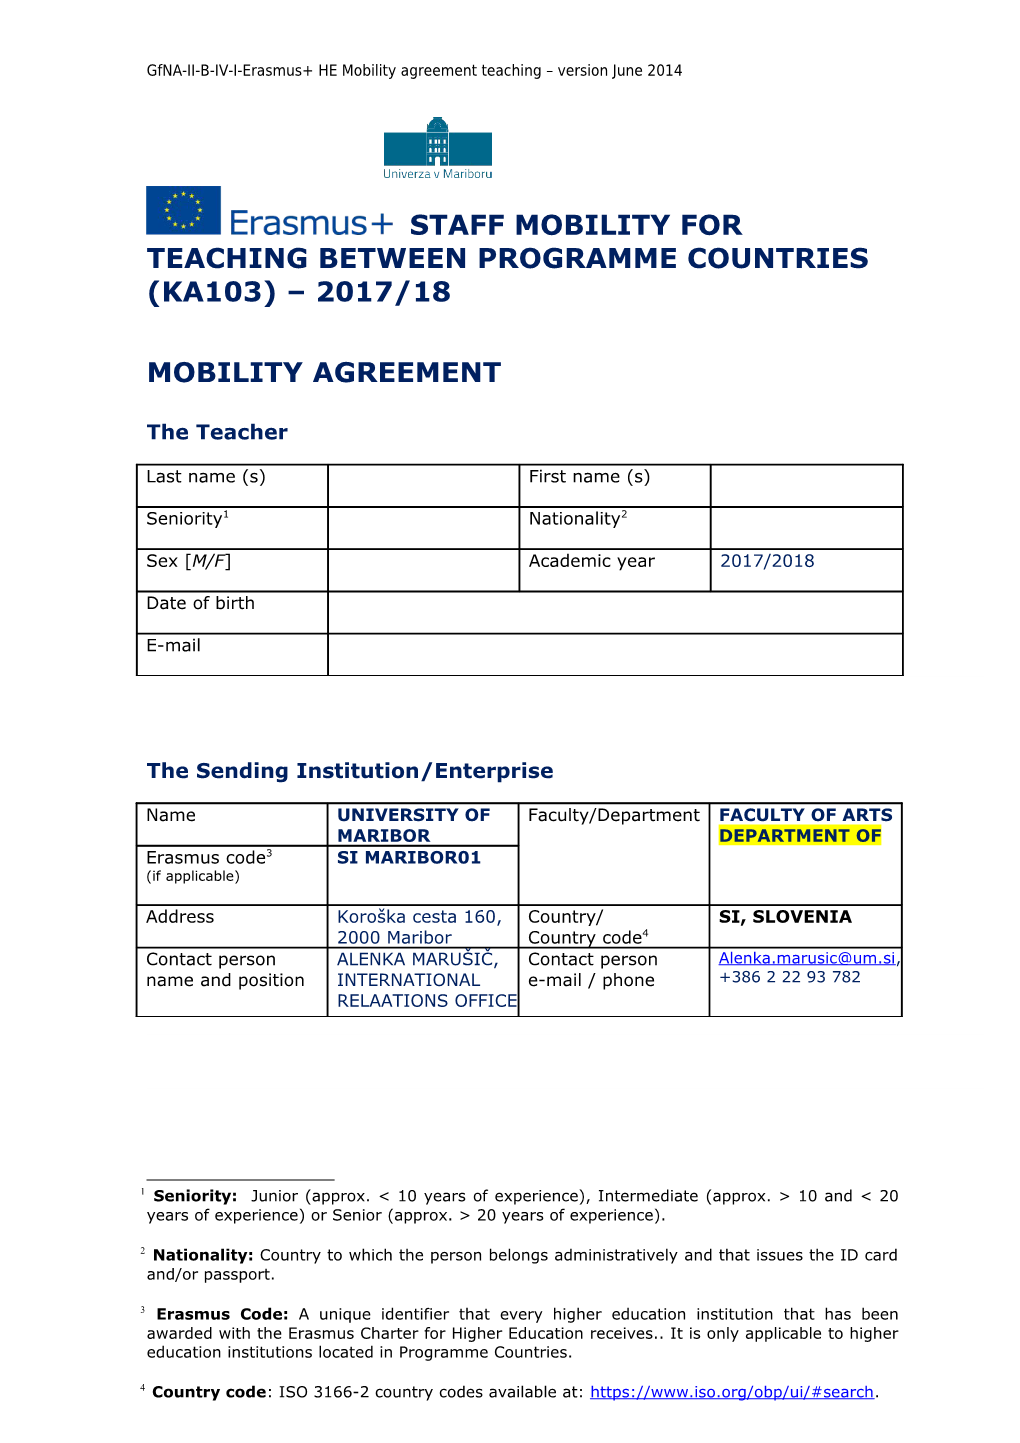 Staff Mobility for Teaching Between Programme Countries (Ka103) 2017/18